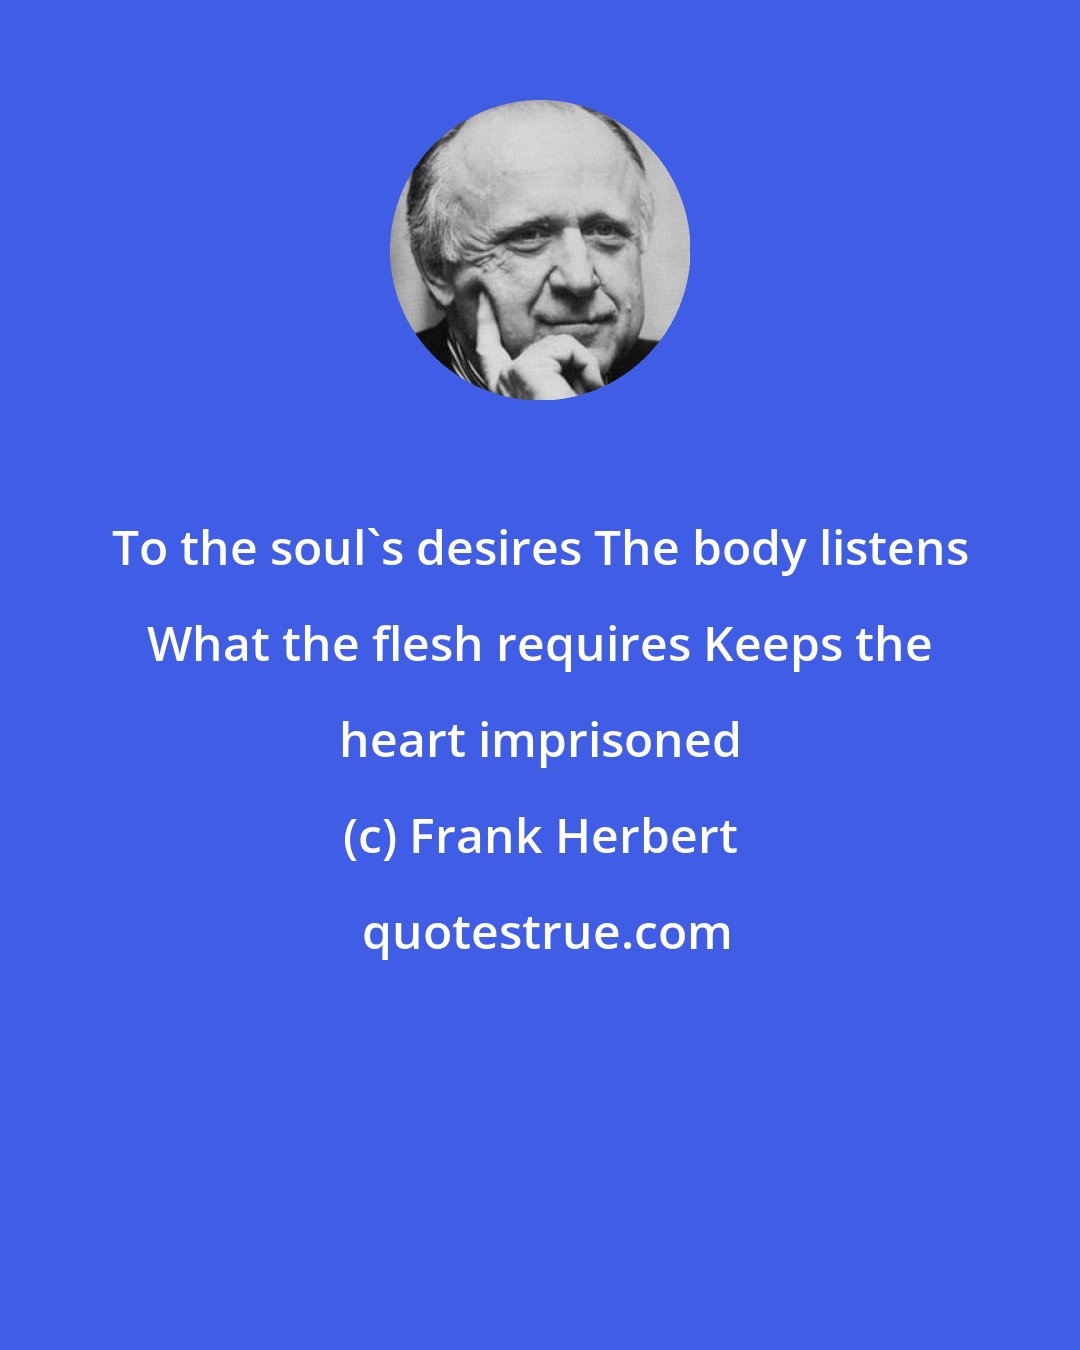 Frank Herbert: To the soul's desires The body listens What the flesh requires Keeps the heart imprisoned